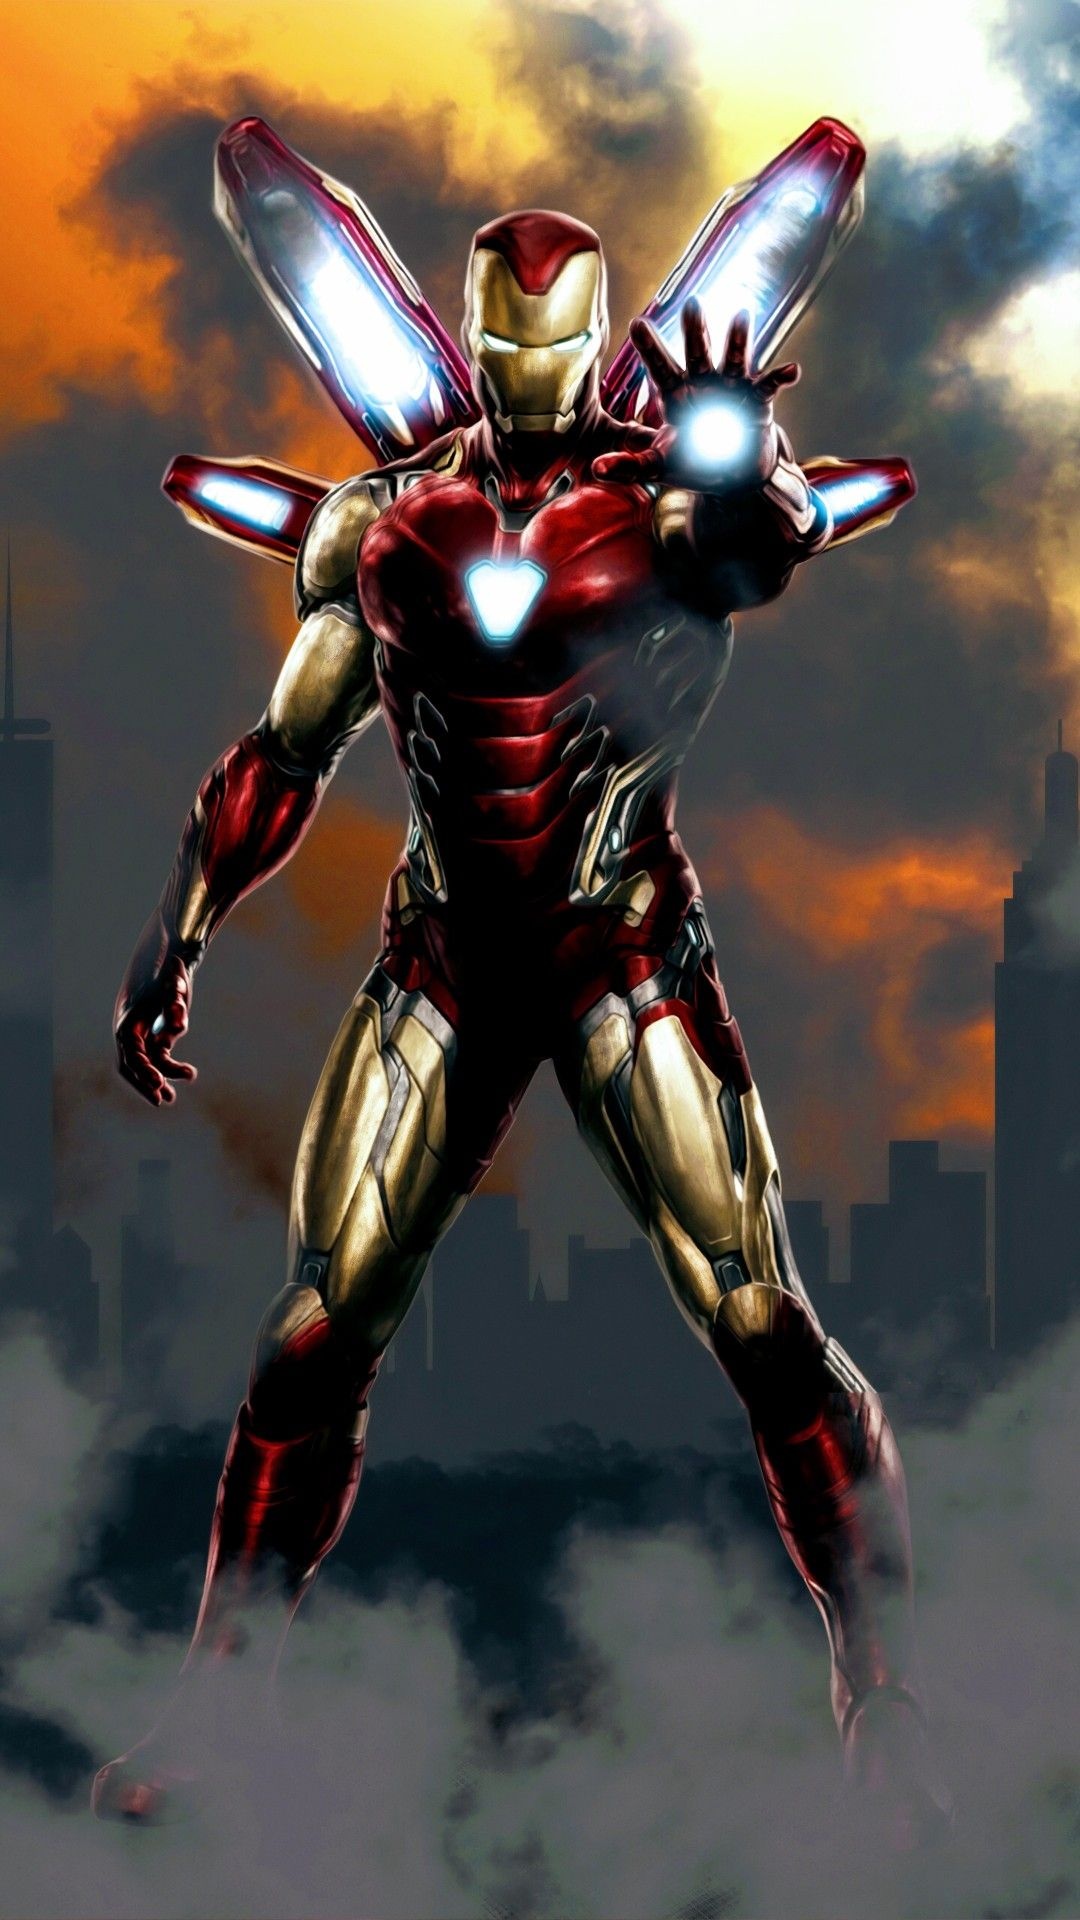 Iron Man suit, new suit, wallpapers, 1080x1920 Full HD Handy